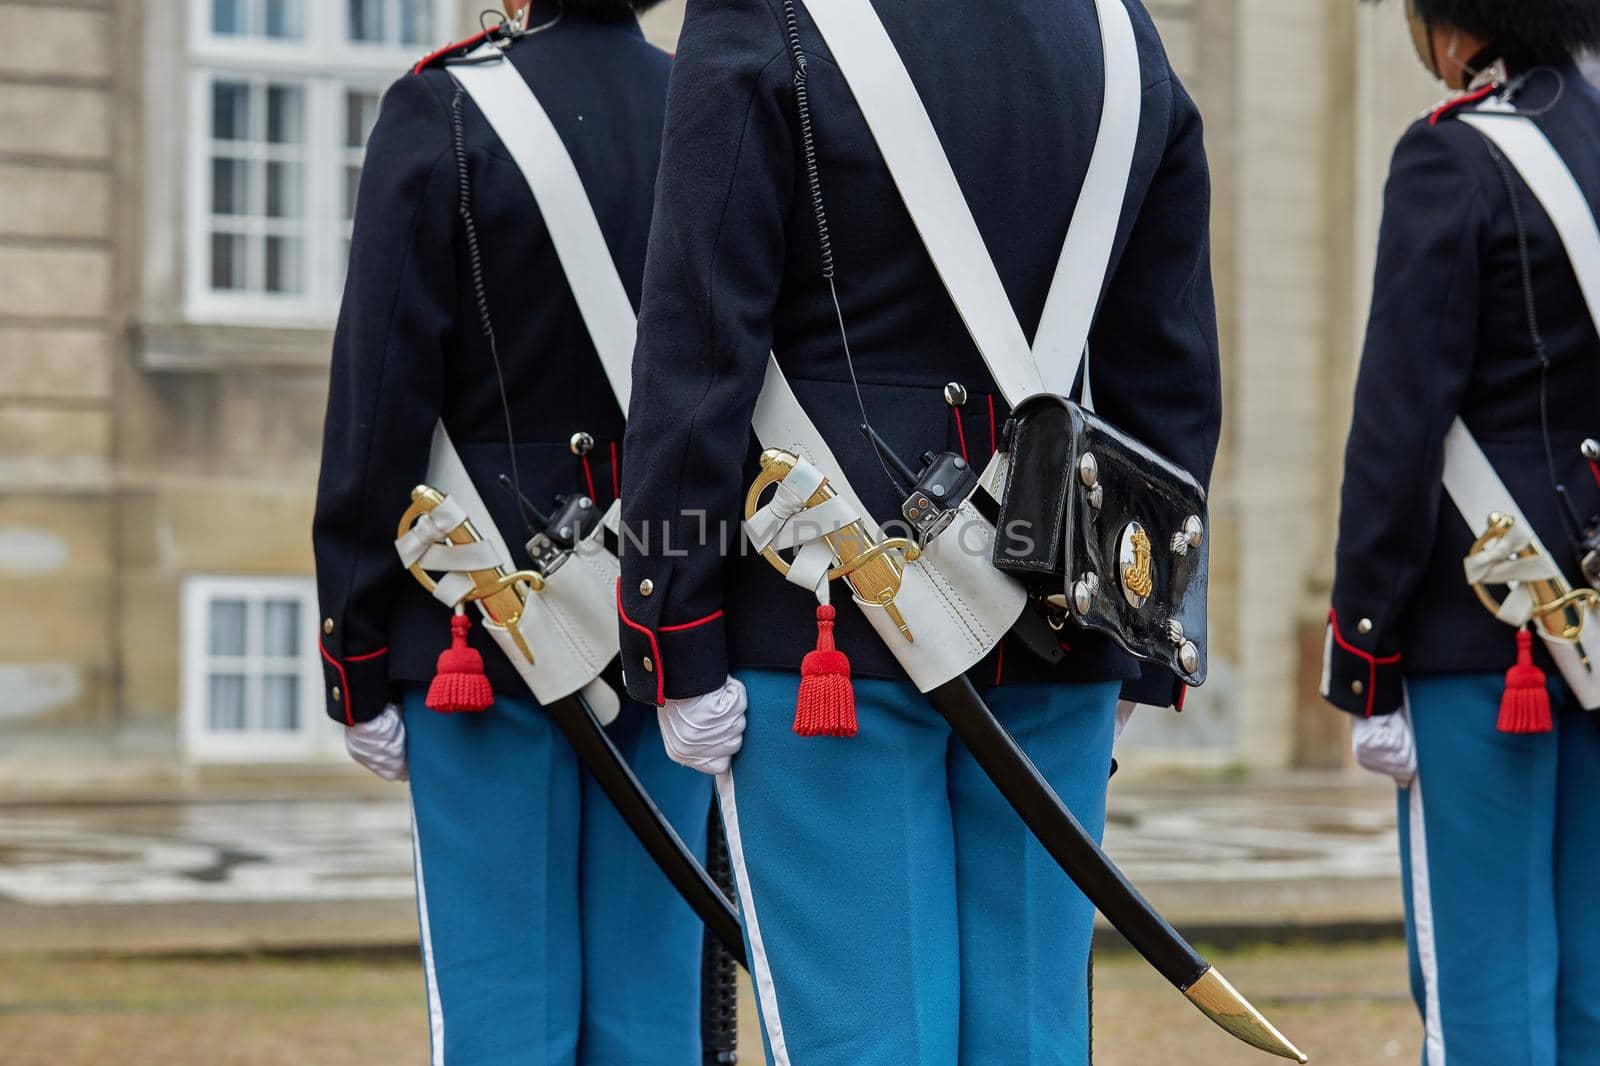 COPENHAGEN, DENMARK - SEPTEMBER 16, 2017: Detail of Royal Guards during the ceremony of changing the guards on the square at Amalienborg Castle, Copenhagen, Denmark